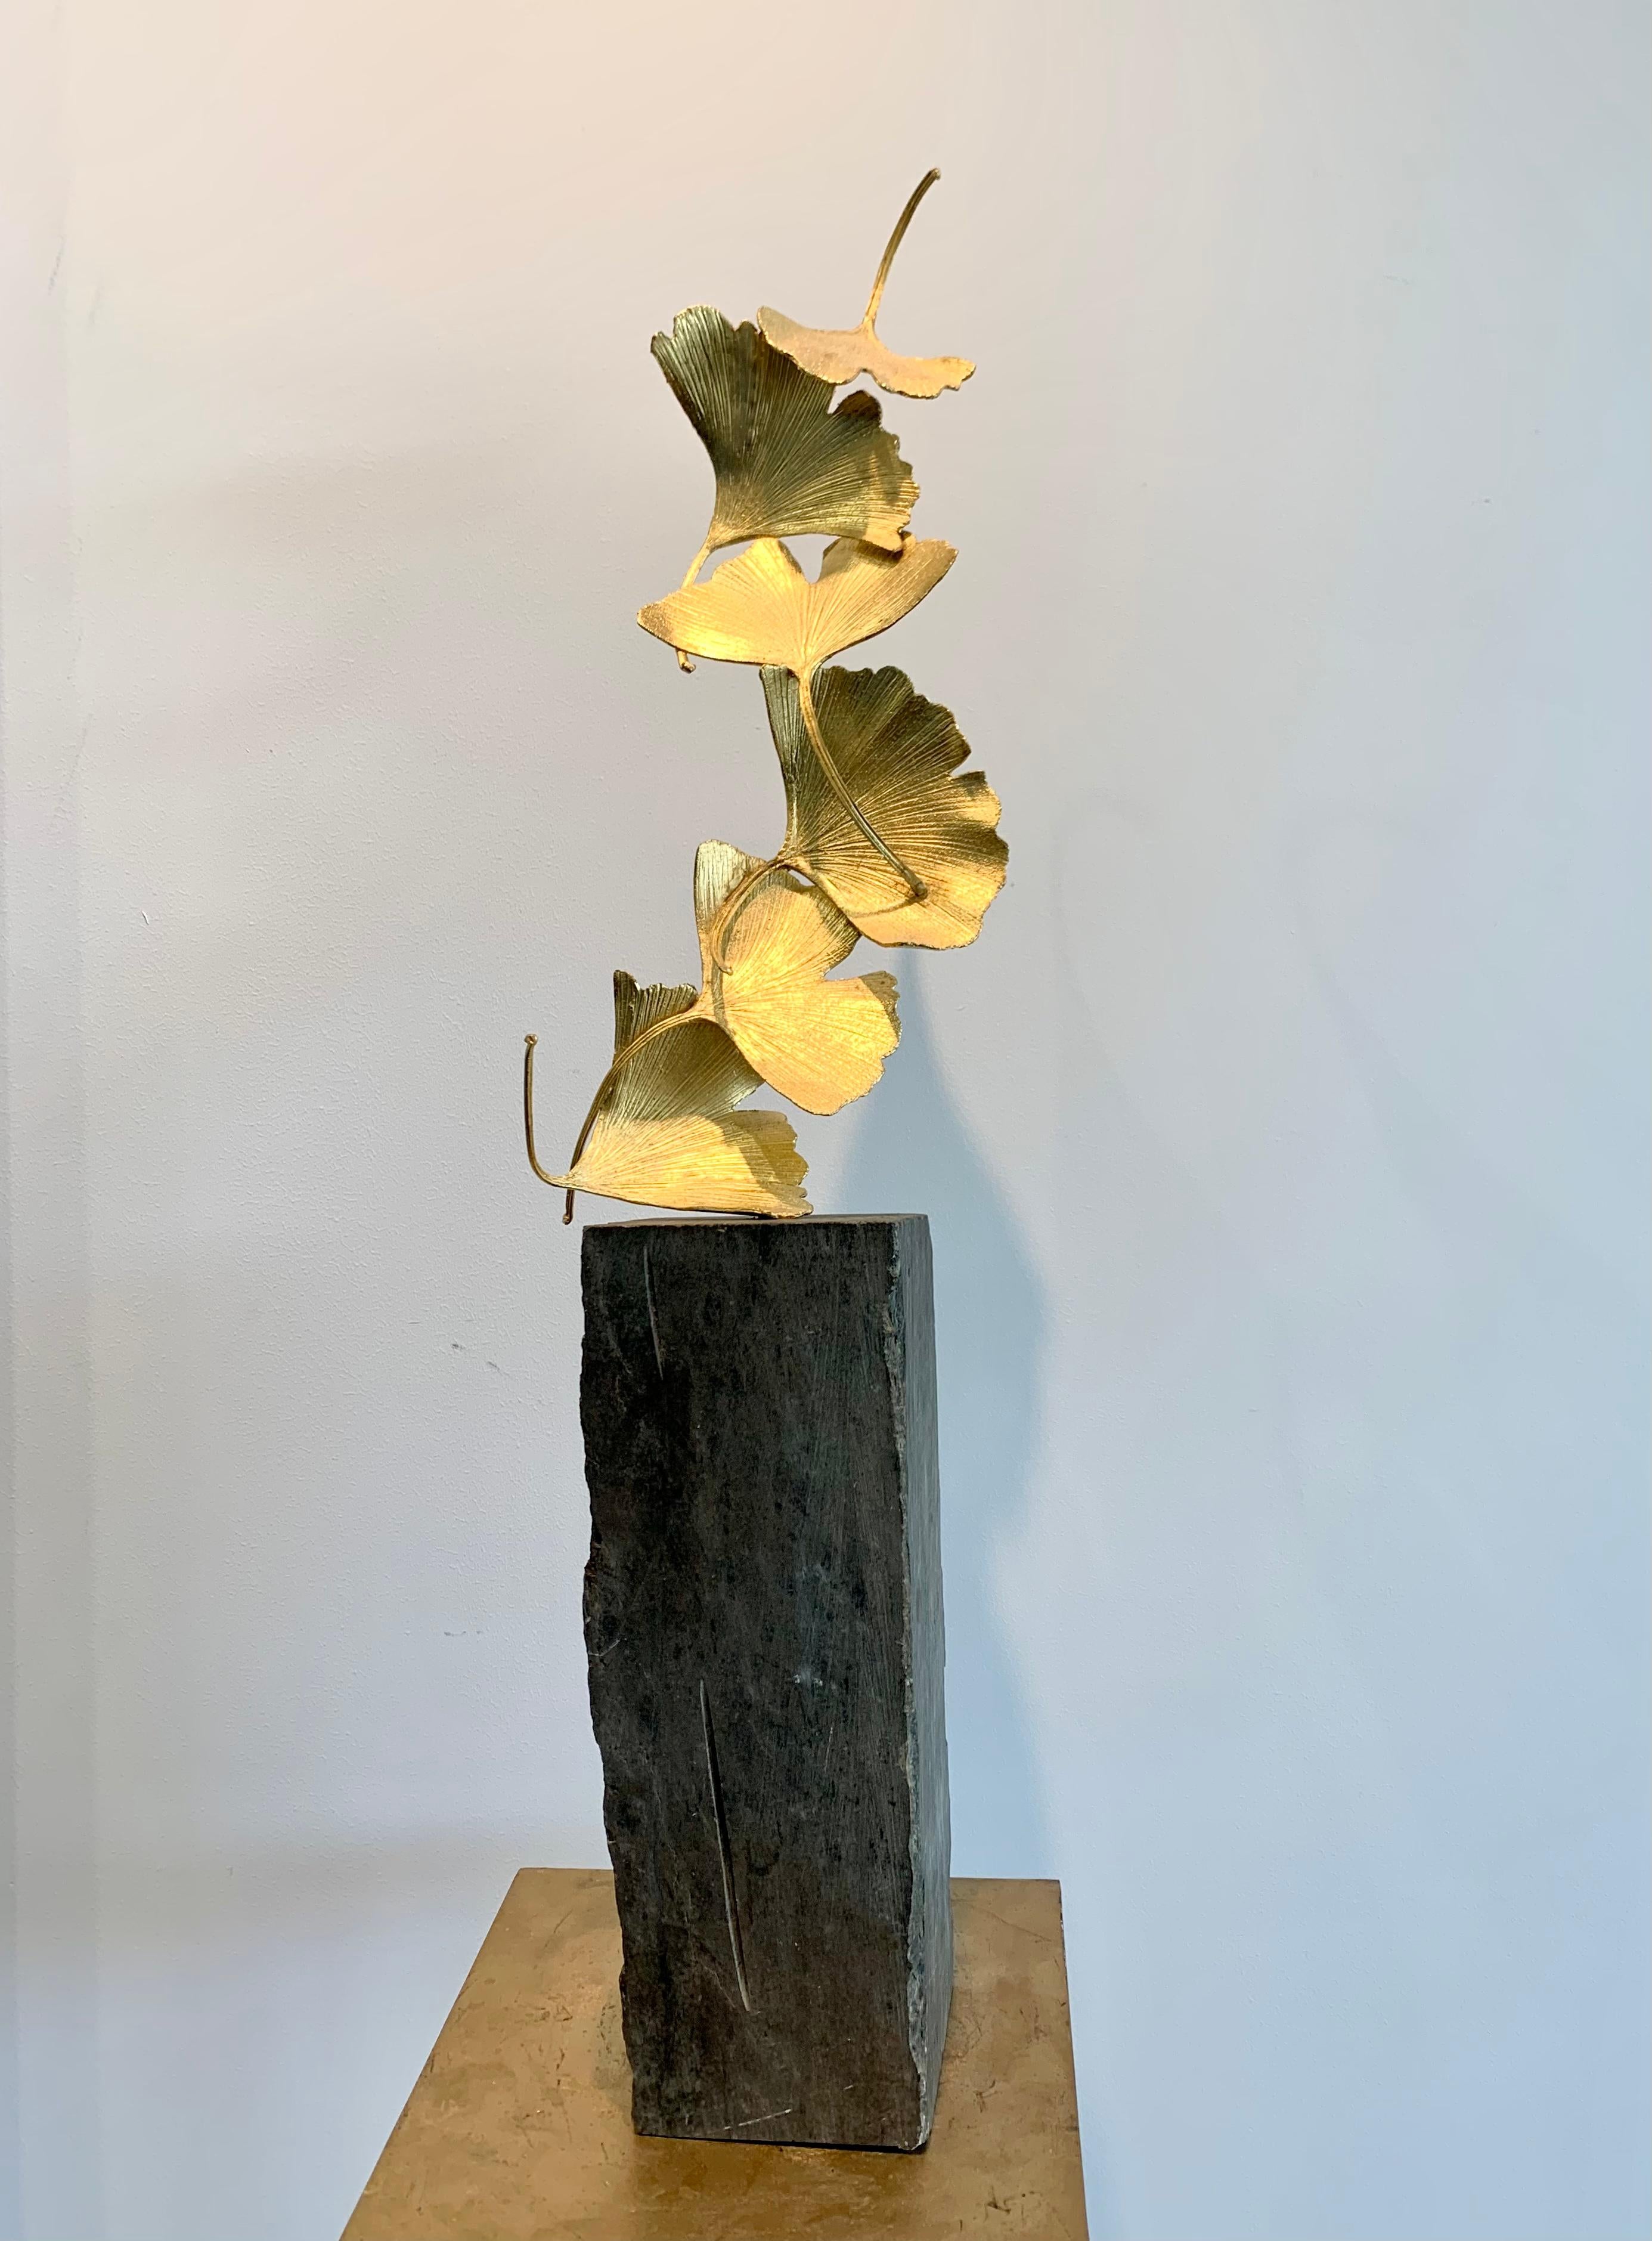 Kuno Vollet Abstract Sculpture - 6 Golden Gingko Leaves - 24 k Gilded Cast Brass sculpture on rough stone base